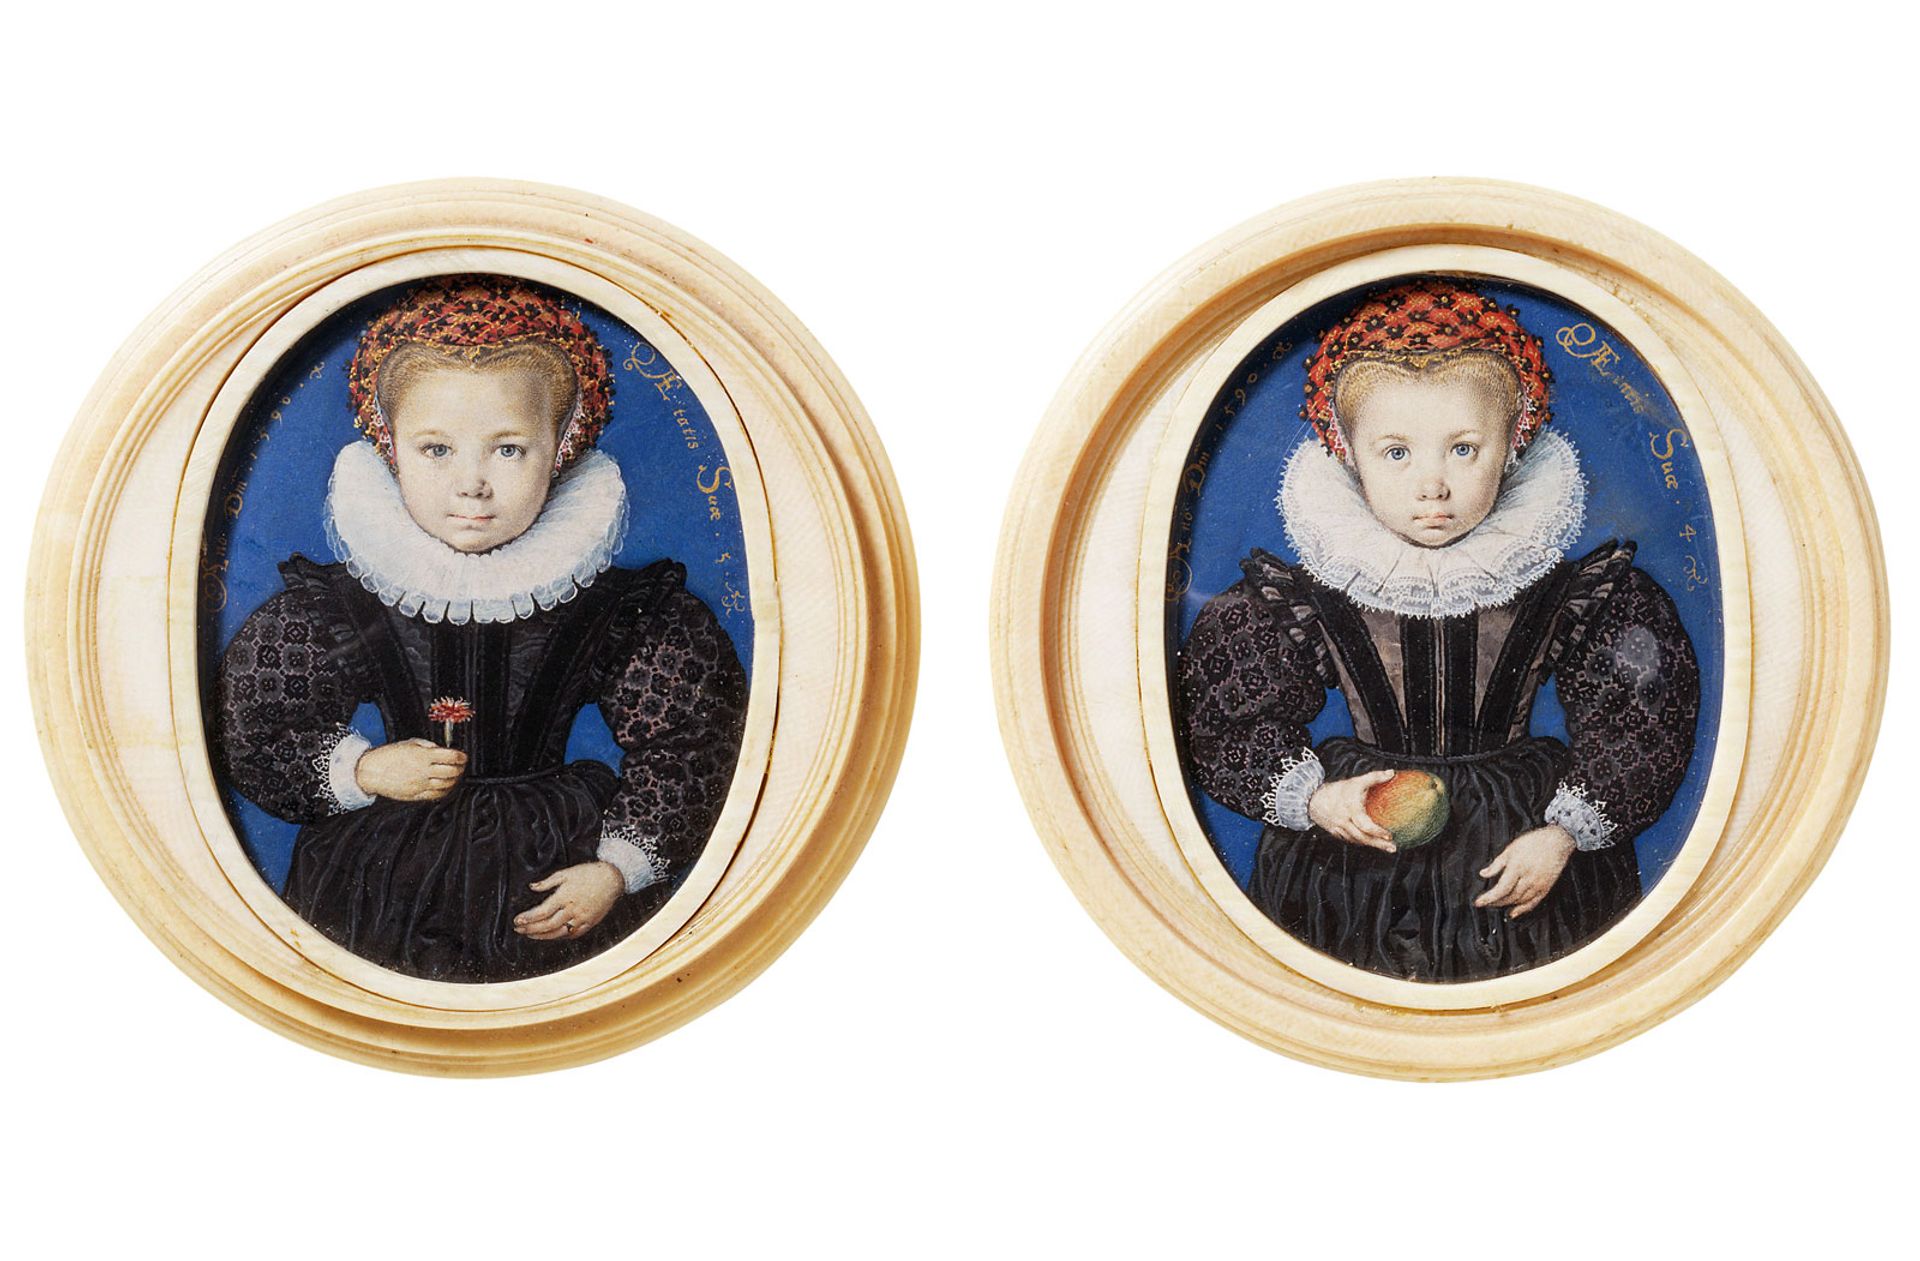 Isaac Oliver's Unknown girls aged 5 and 4 (1590) are on show at the National Portrait Gallery © Victoria & Albert Museum, London